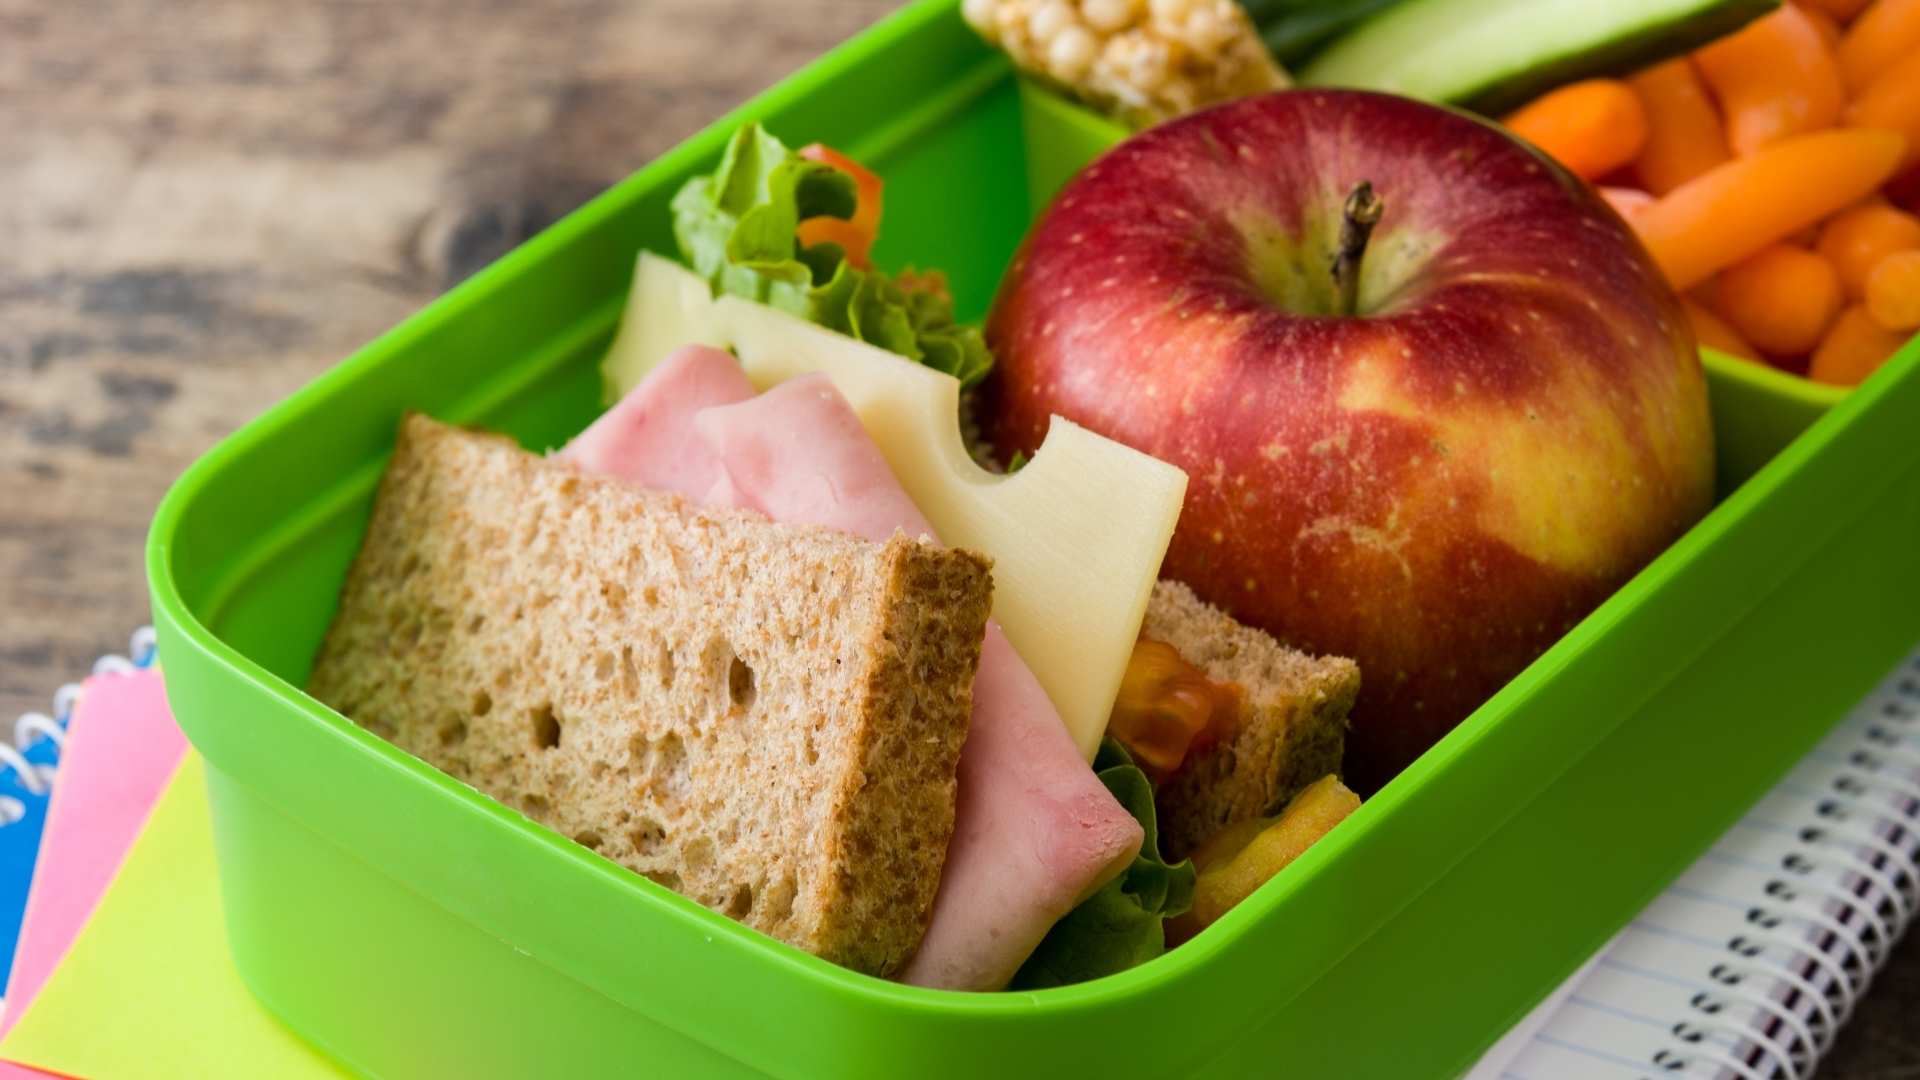 Individual Lunch Box Catering - Washington DC Boxed Lunches